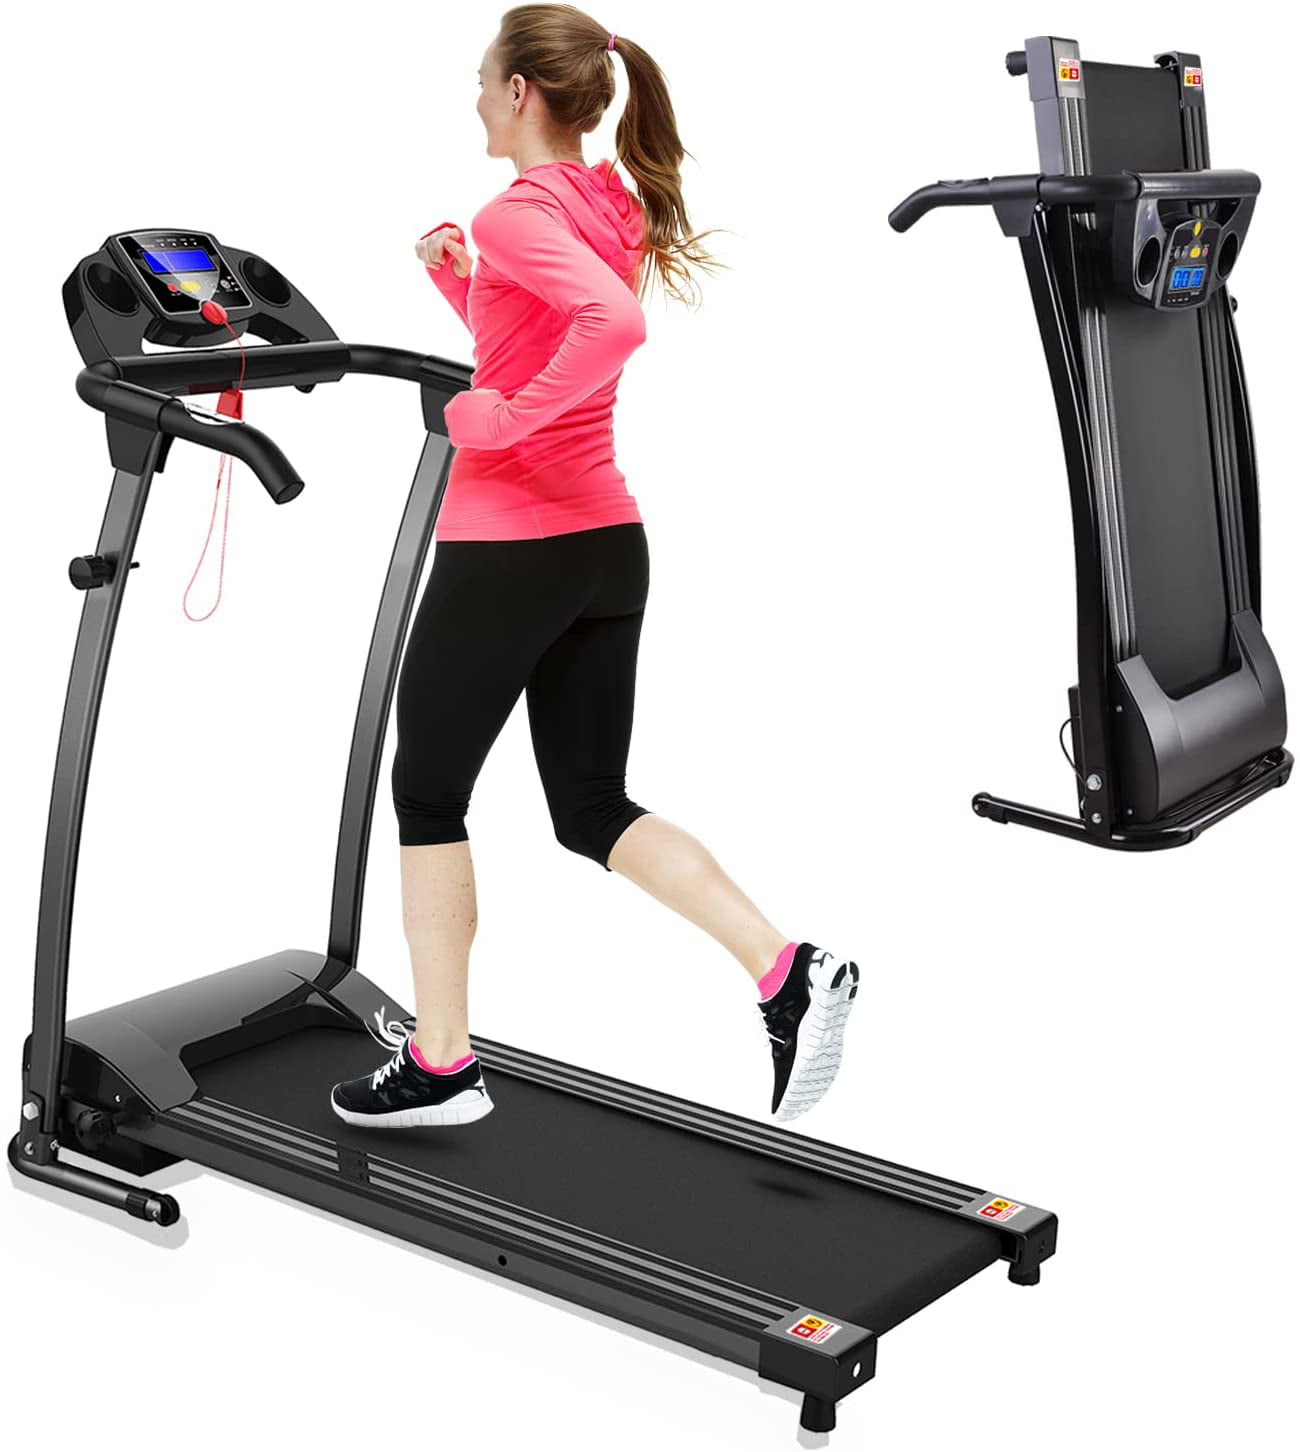 Indoor Walking Machine for Home and Office Exercise 2HP Folding Treadmill Home Treadmill with Bluetooth Audio 2-in-1 Walking Machine Sytiry Desktop Treadmill 